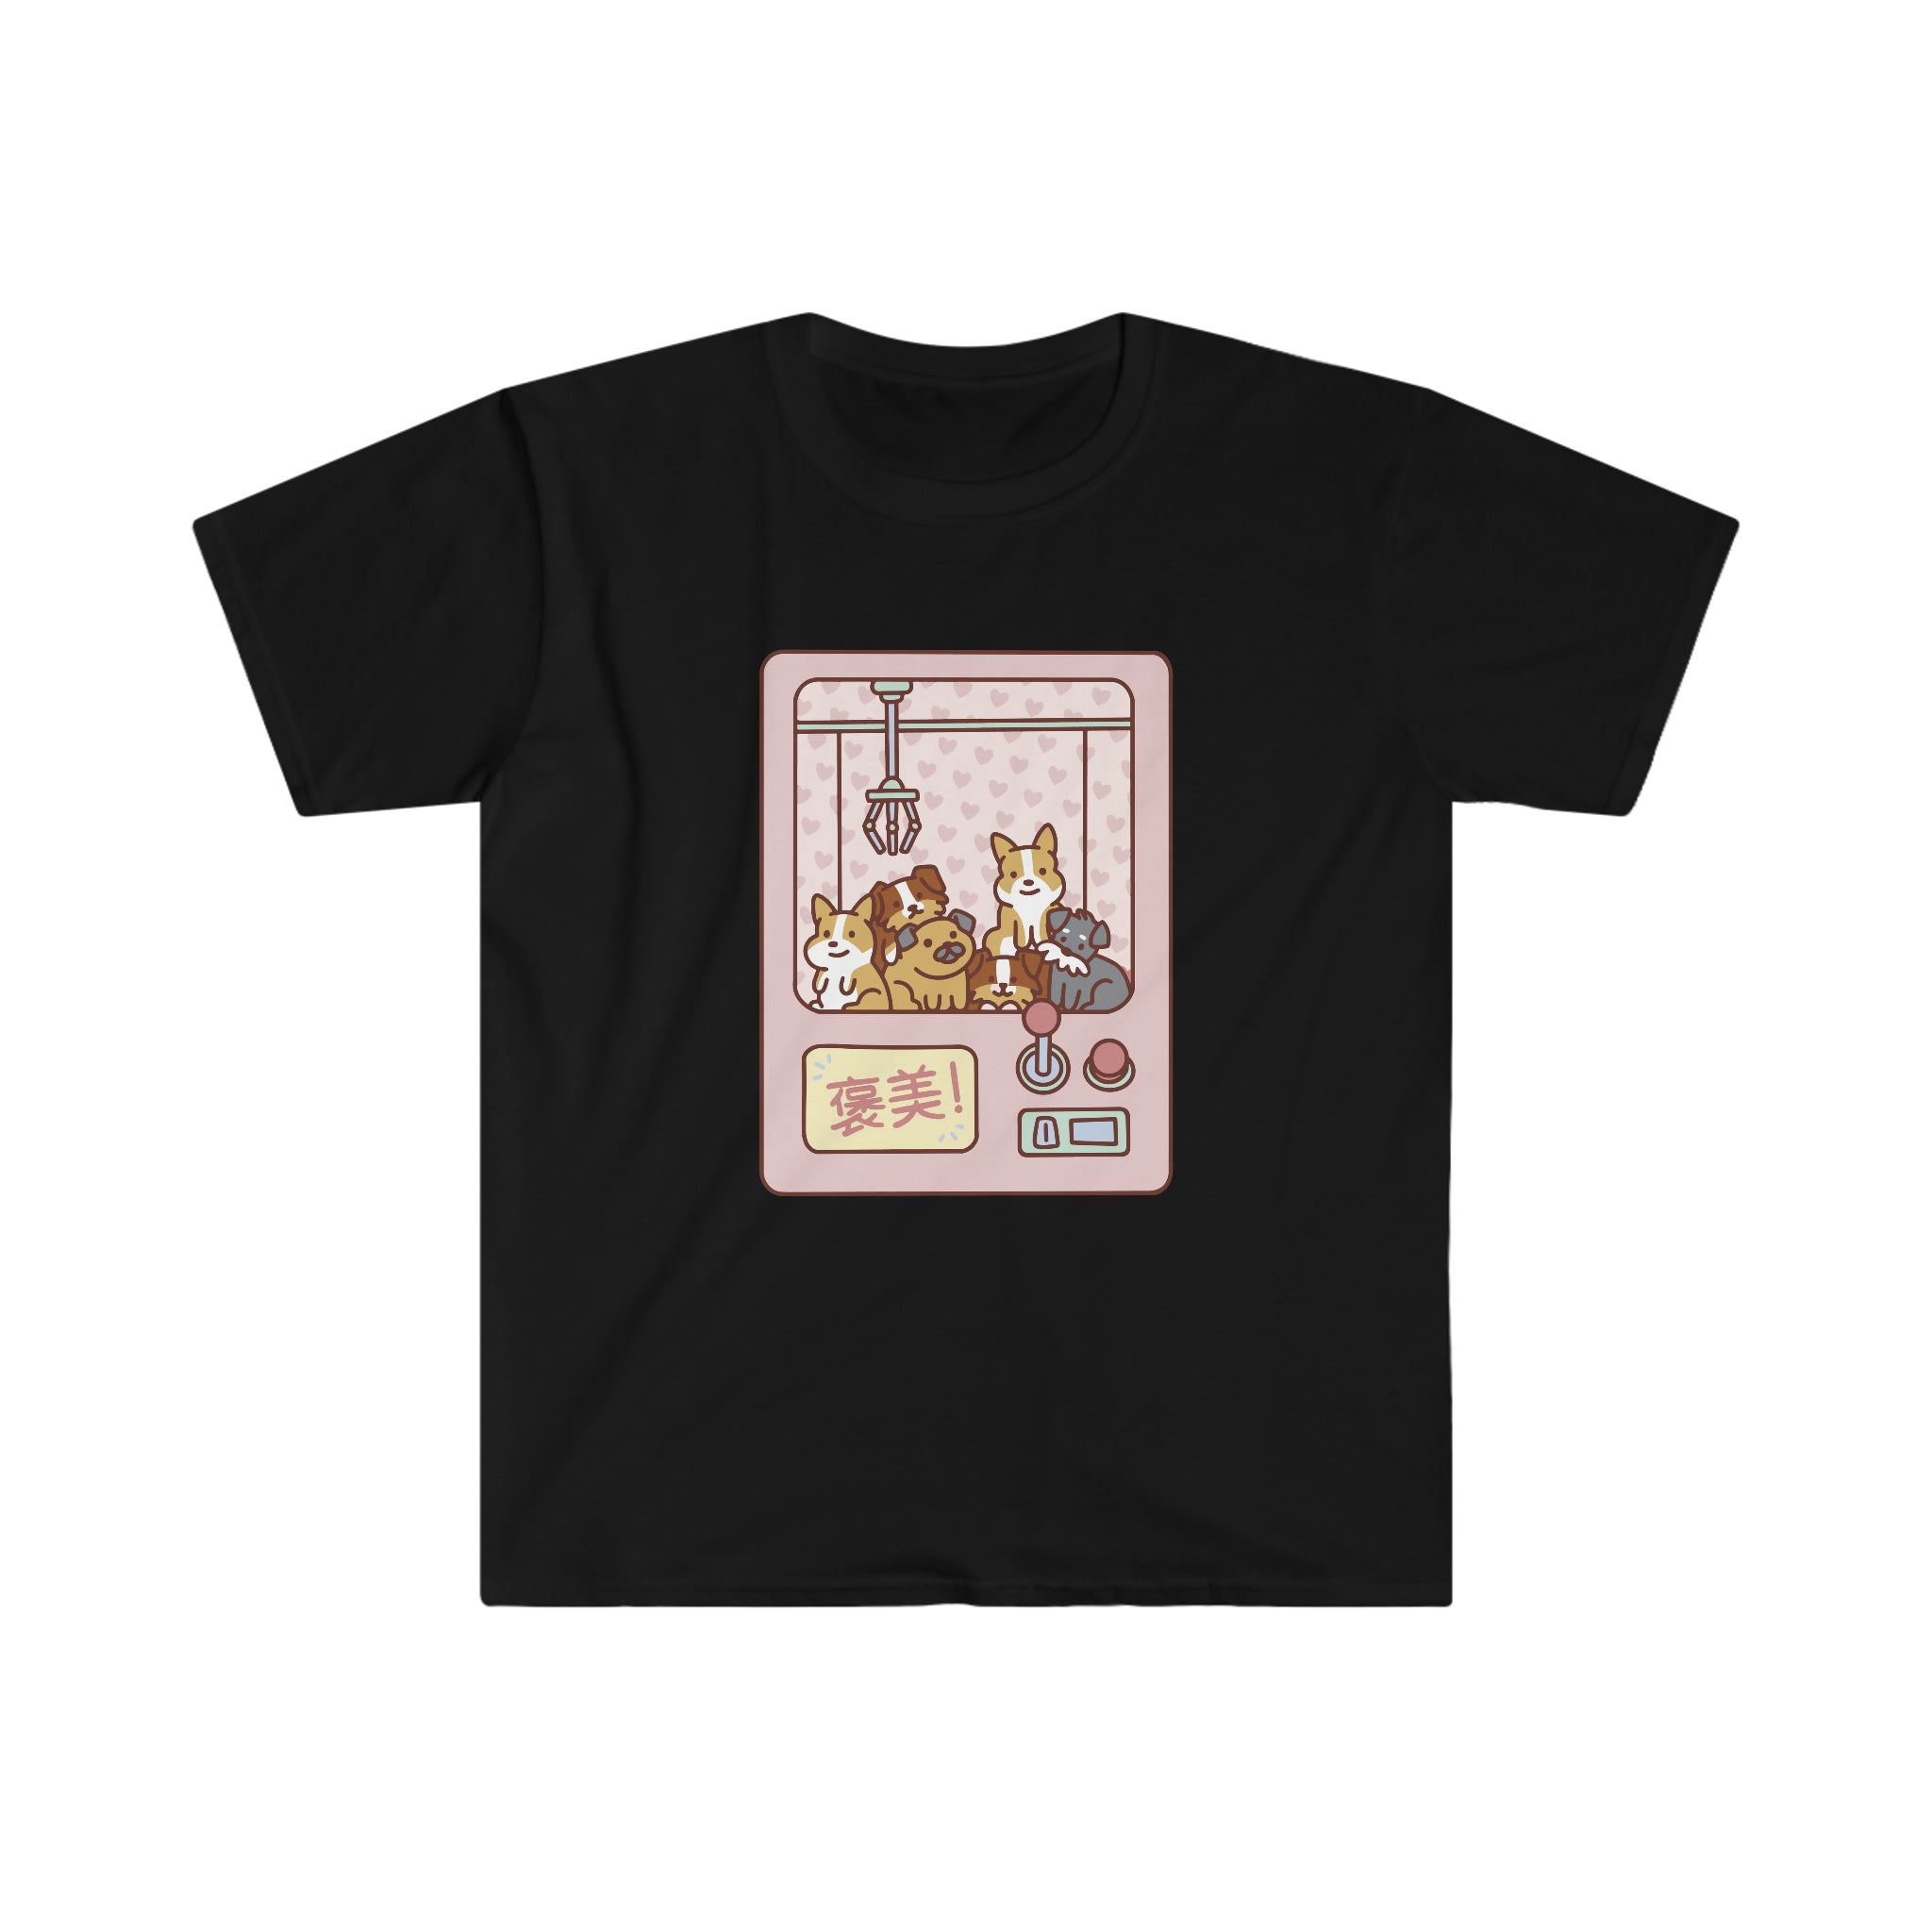 A Cute Clew black t-shirt with an image of a cat and a dog, made by Printify.